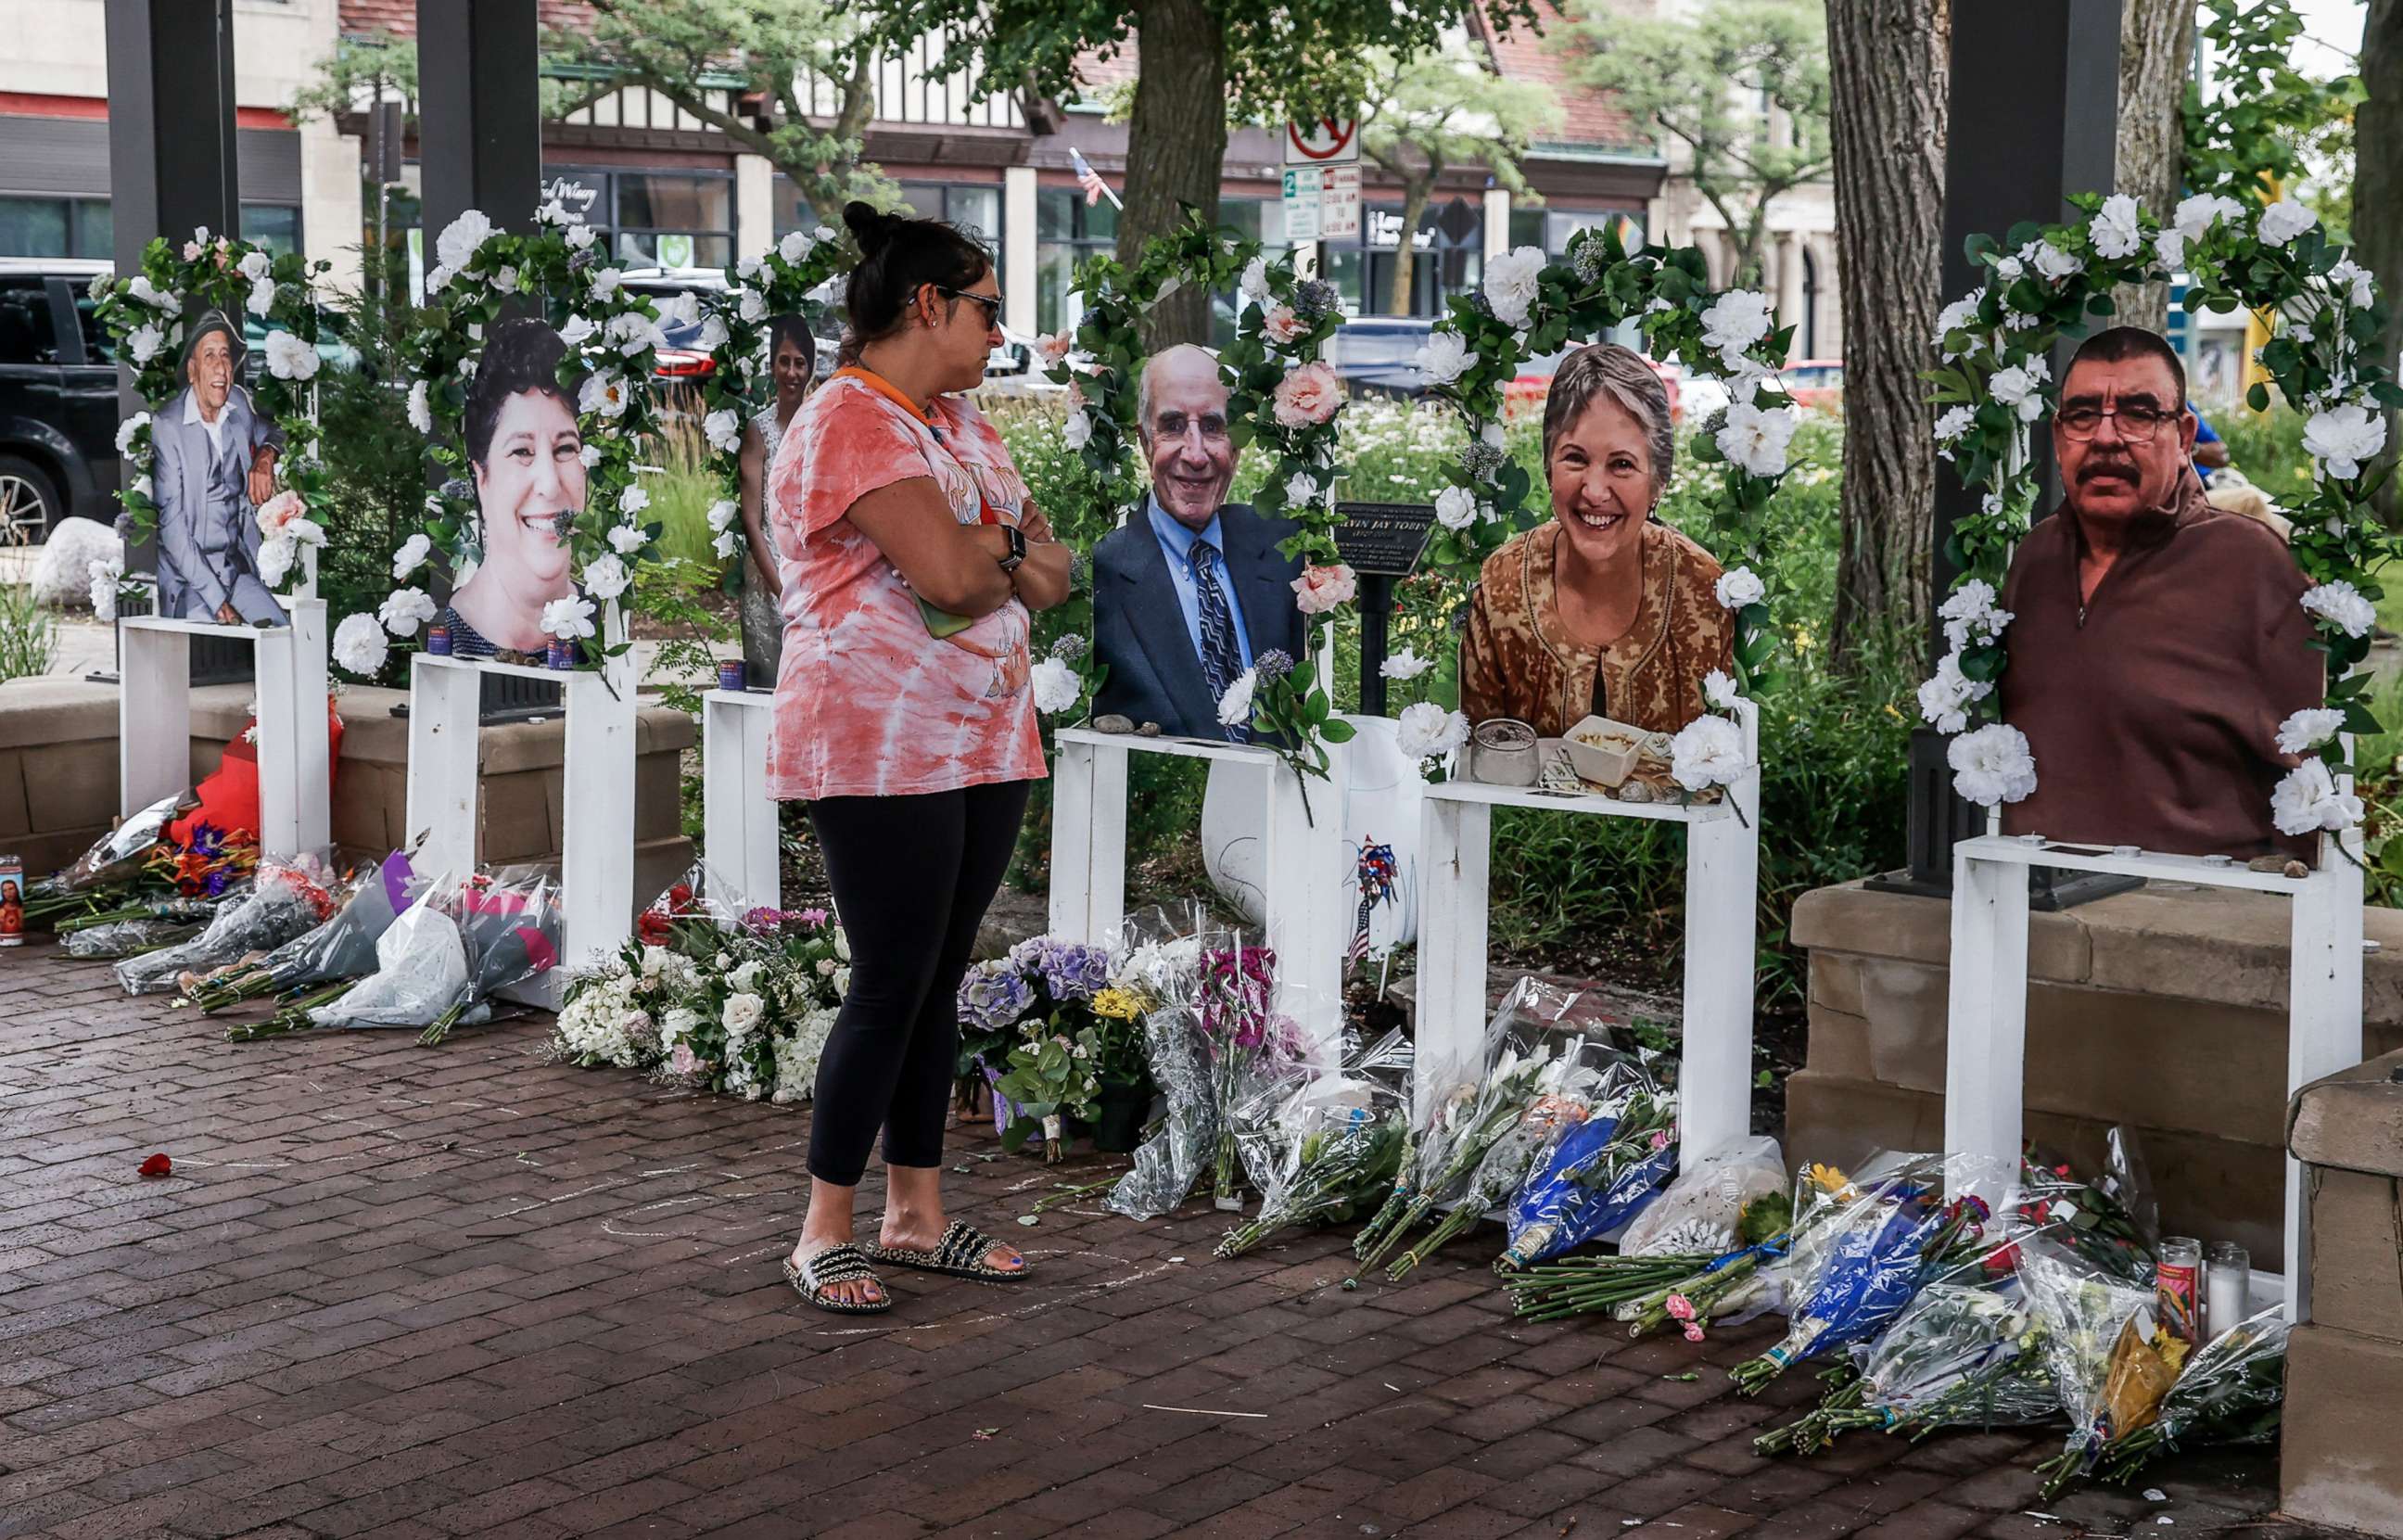 PHOTO: A woman looks a photographs of victims at a memorial near the scene of a mass shooting that took place at a 4th of July celebration and parade in Highland Park, Ill., July 7, 2022.